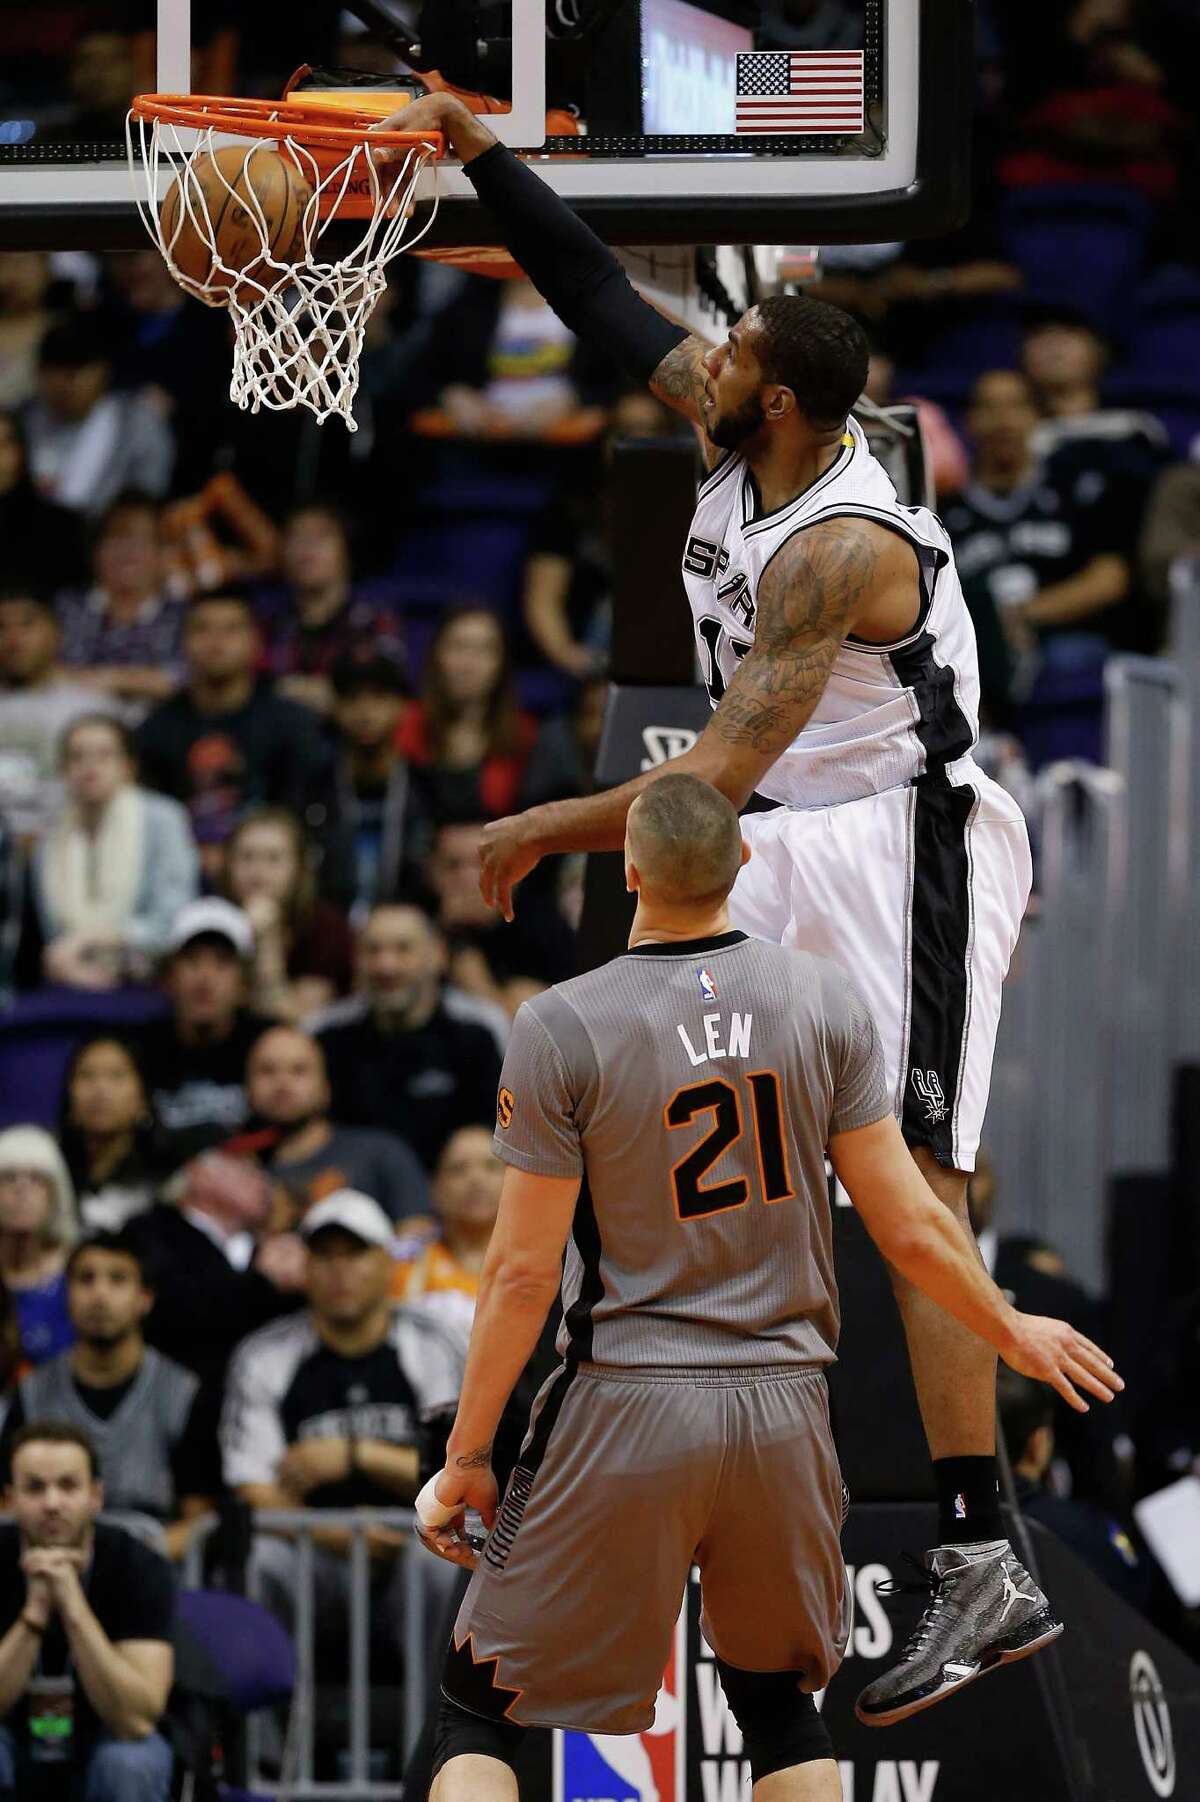 PHOENIX, AZ - JANUARY 21: LaMarcus Aldridge #12 of the San Antonio Spurs slam dunks against the Phoenix Suns during the first half of the NBA game at Talking Stick Resort Arena on January 21, 2016 in Phoenix, Arizona. NOTE TO USER: User expressly acknowledges and agrees that, by downloading and or using this photograph, User is consenting to the terms and conditions of the Getty Images License Agreement.